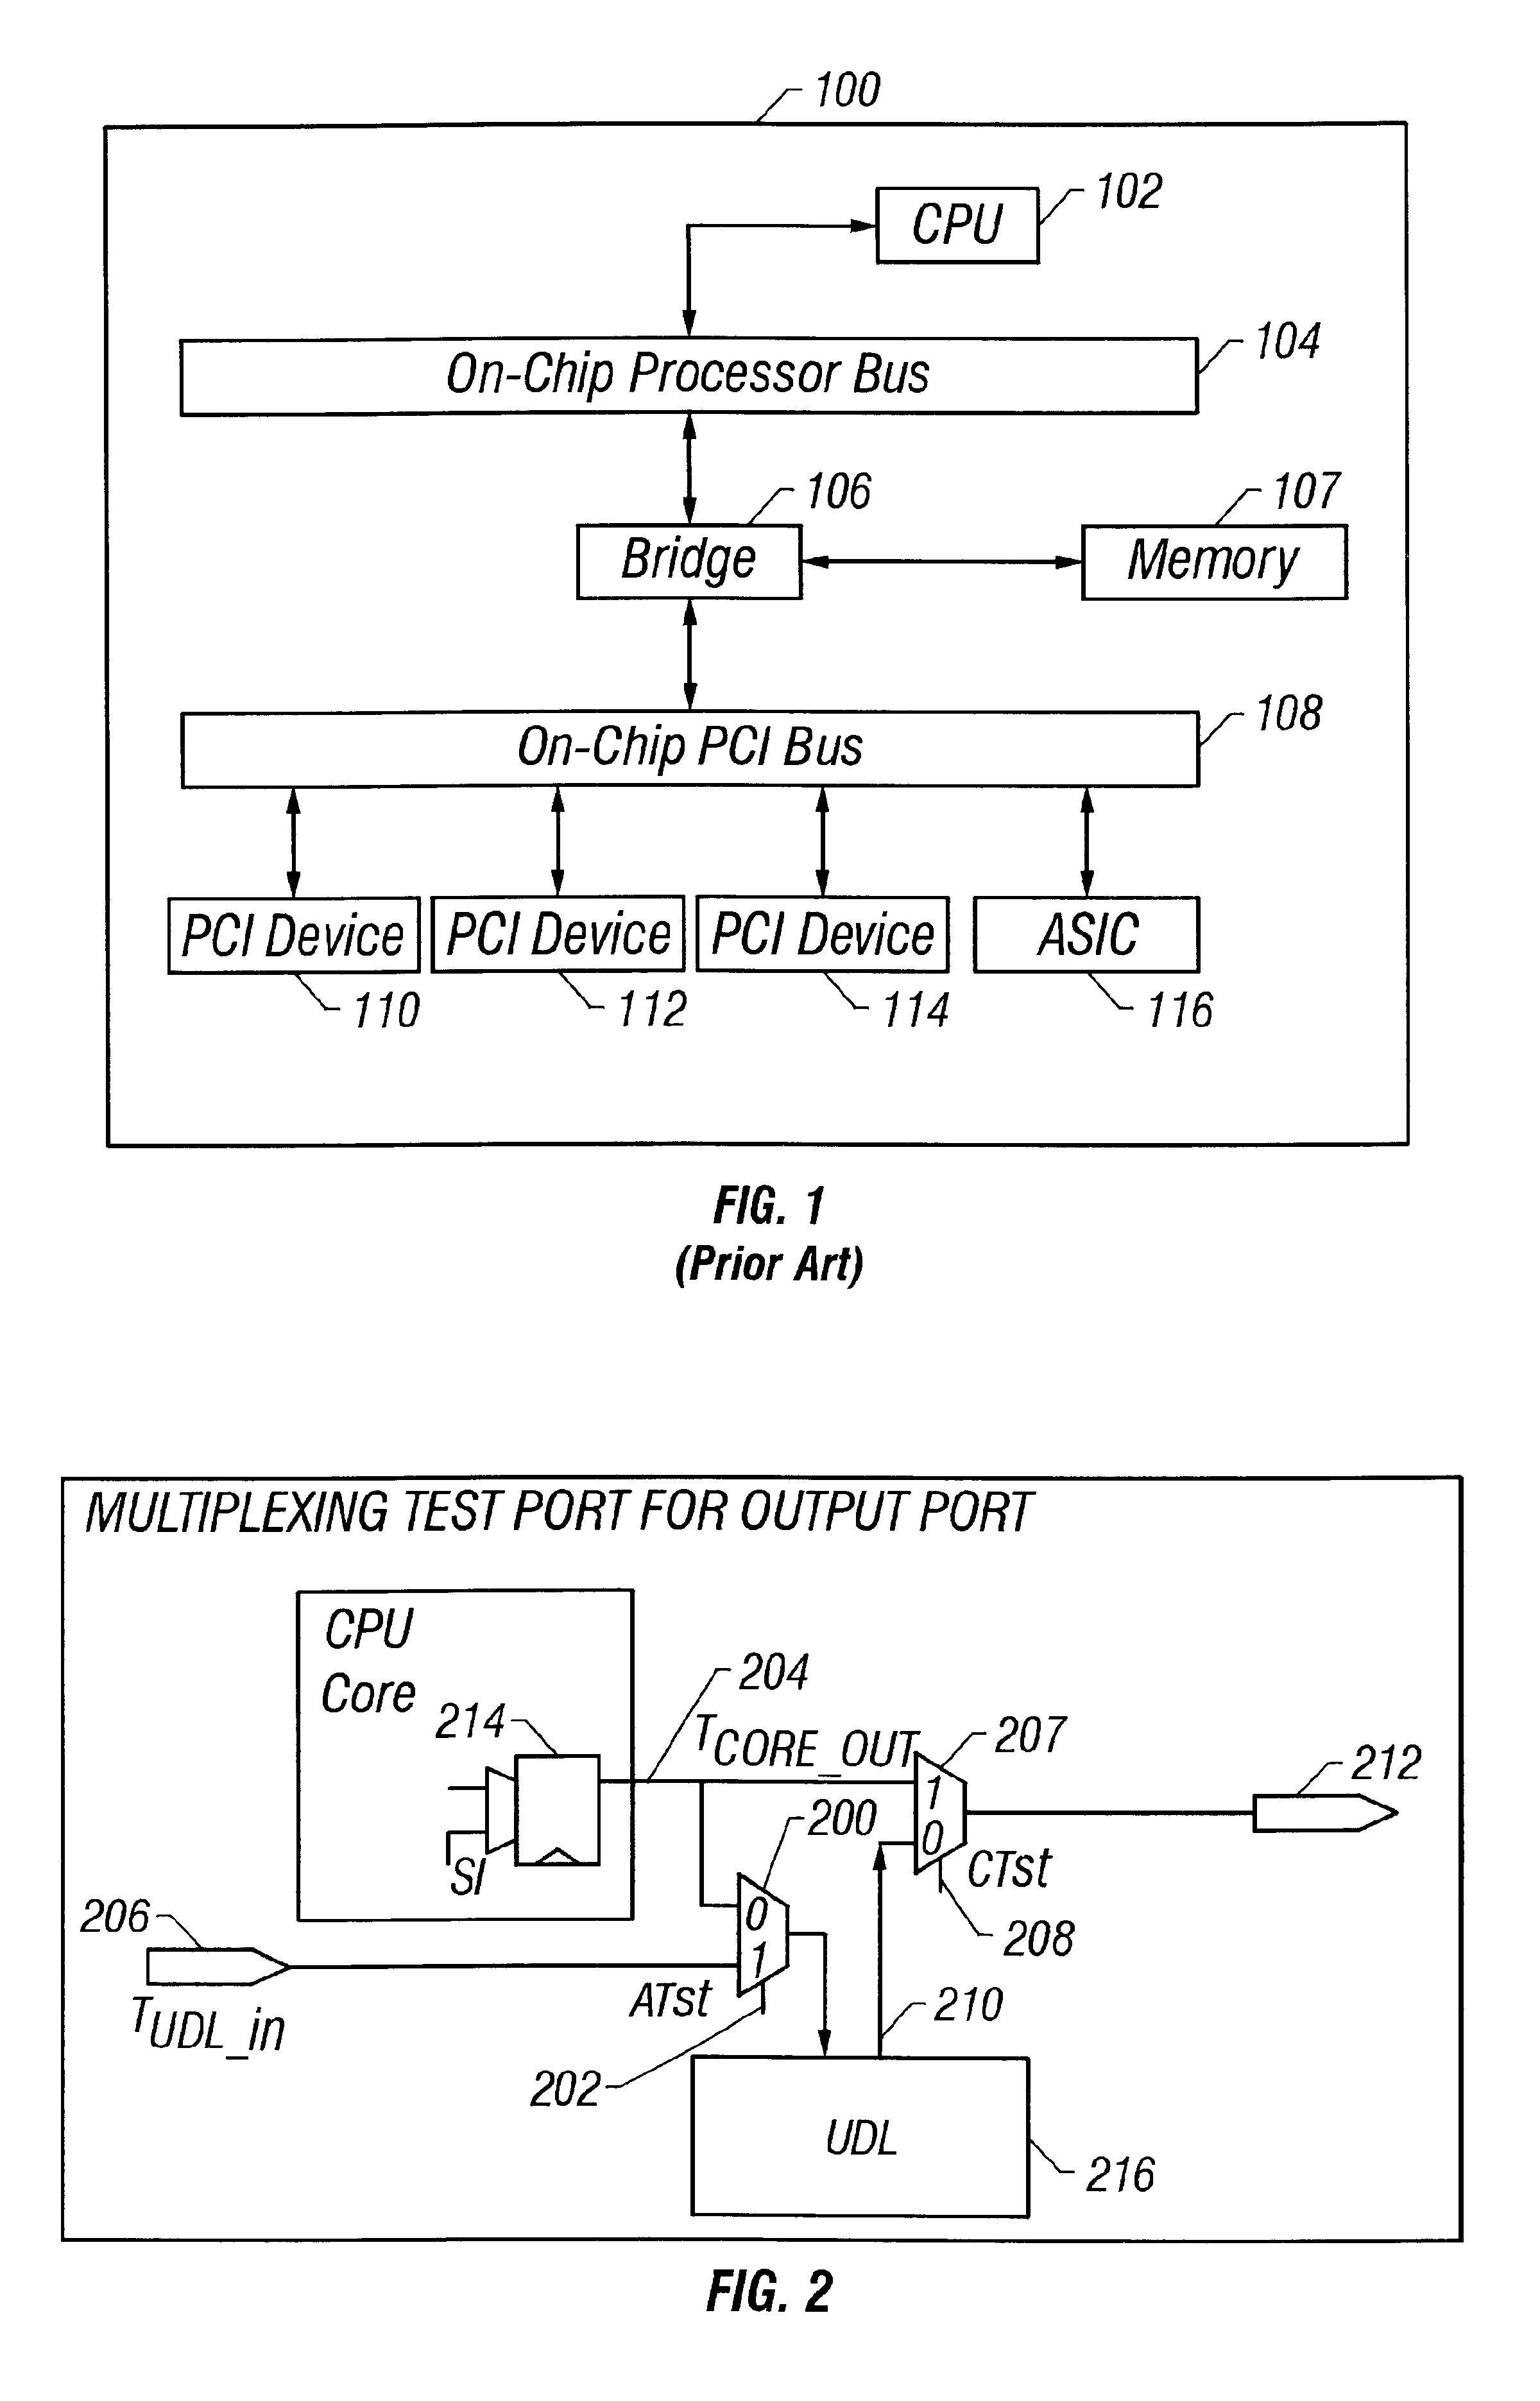 Direct access logic testing in integrated circuits